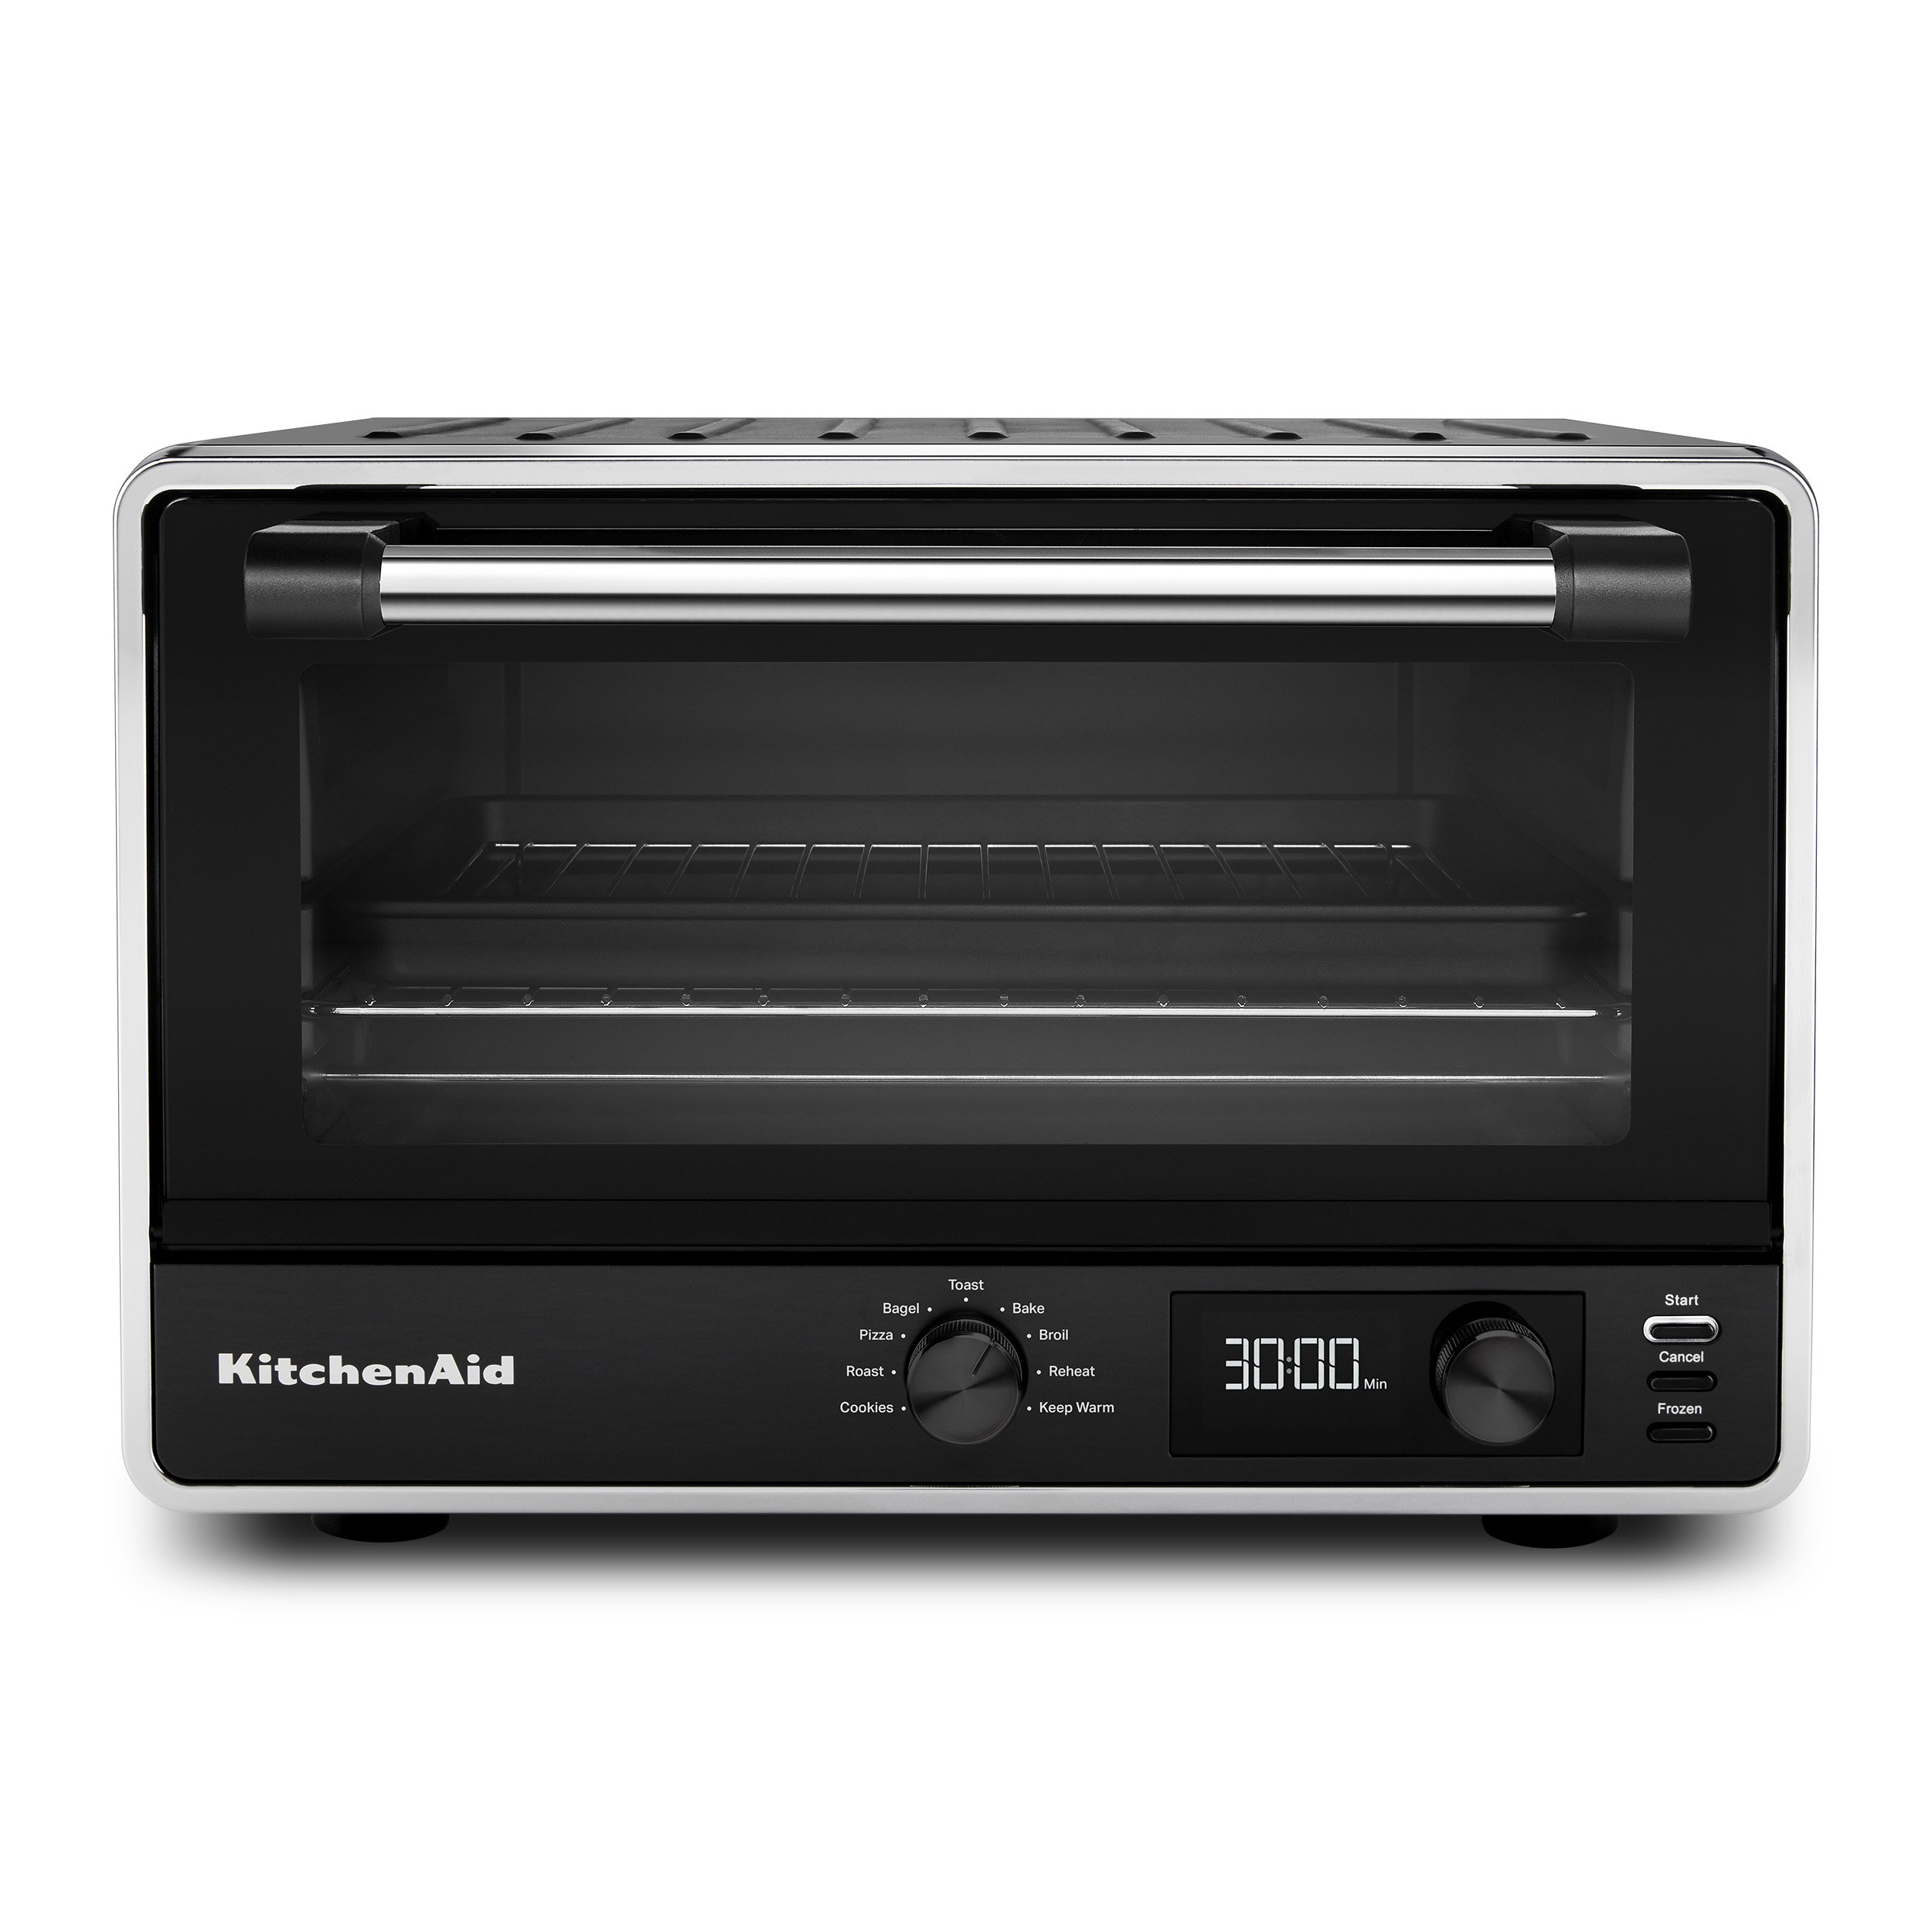 Black+Decker TO4314SSD Toaster & Toaster Oven Review - Consumer Reports